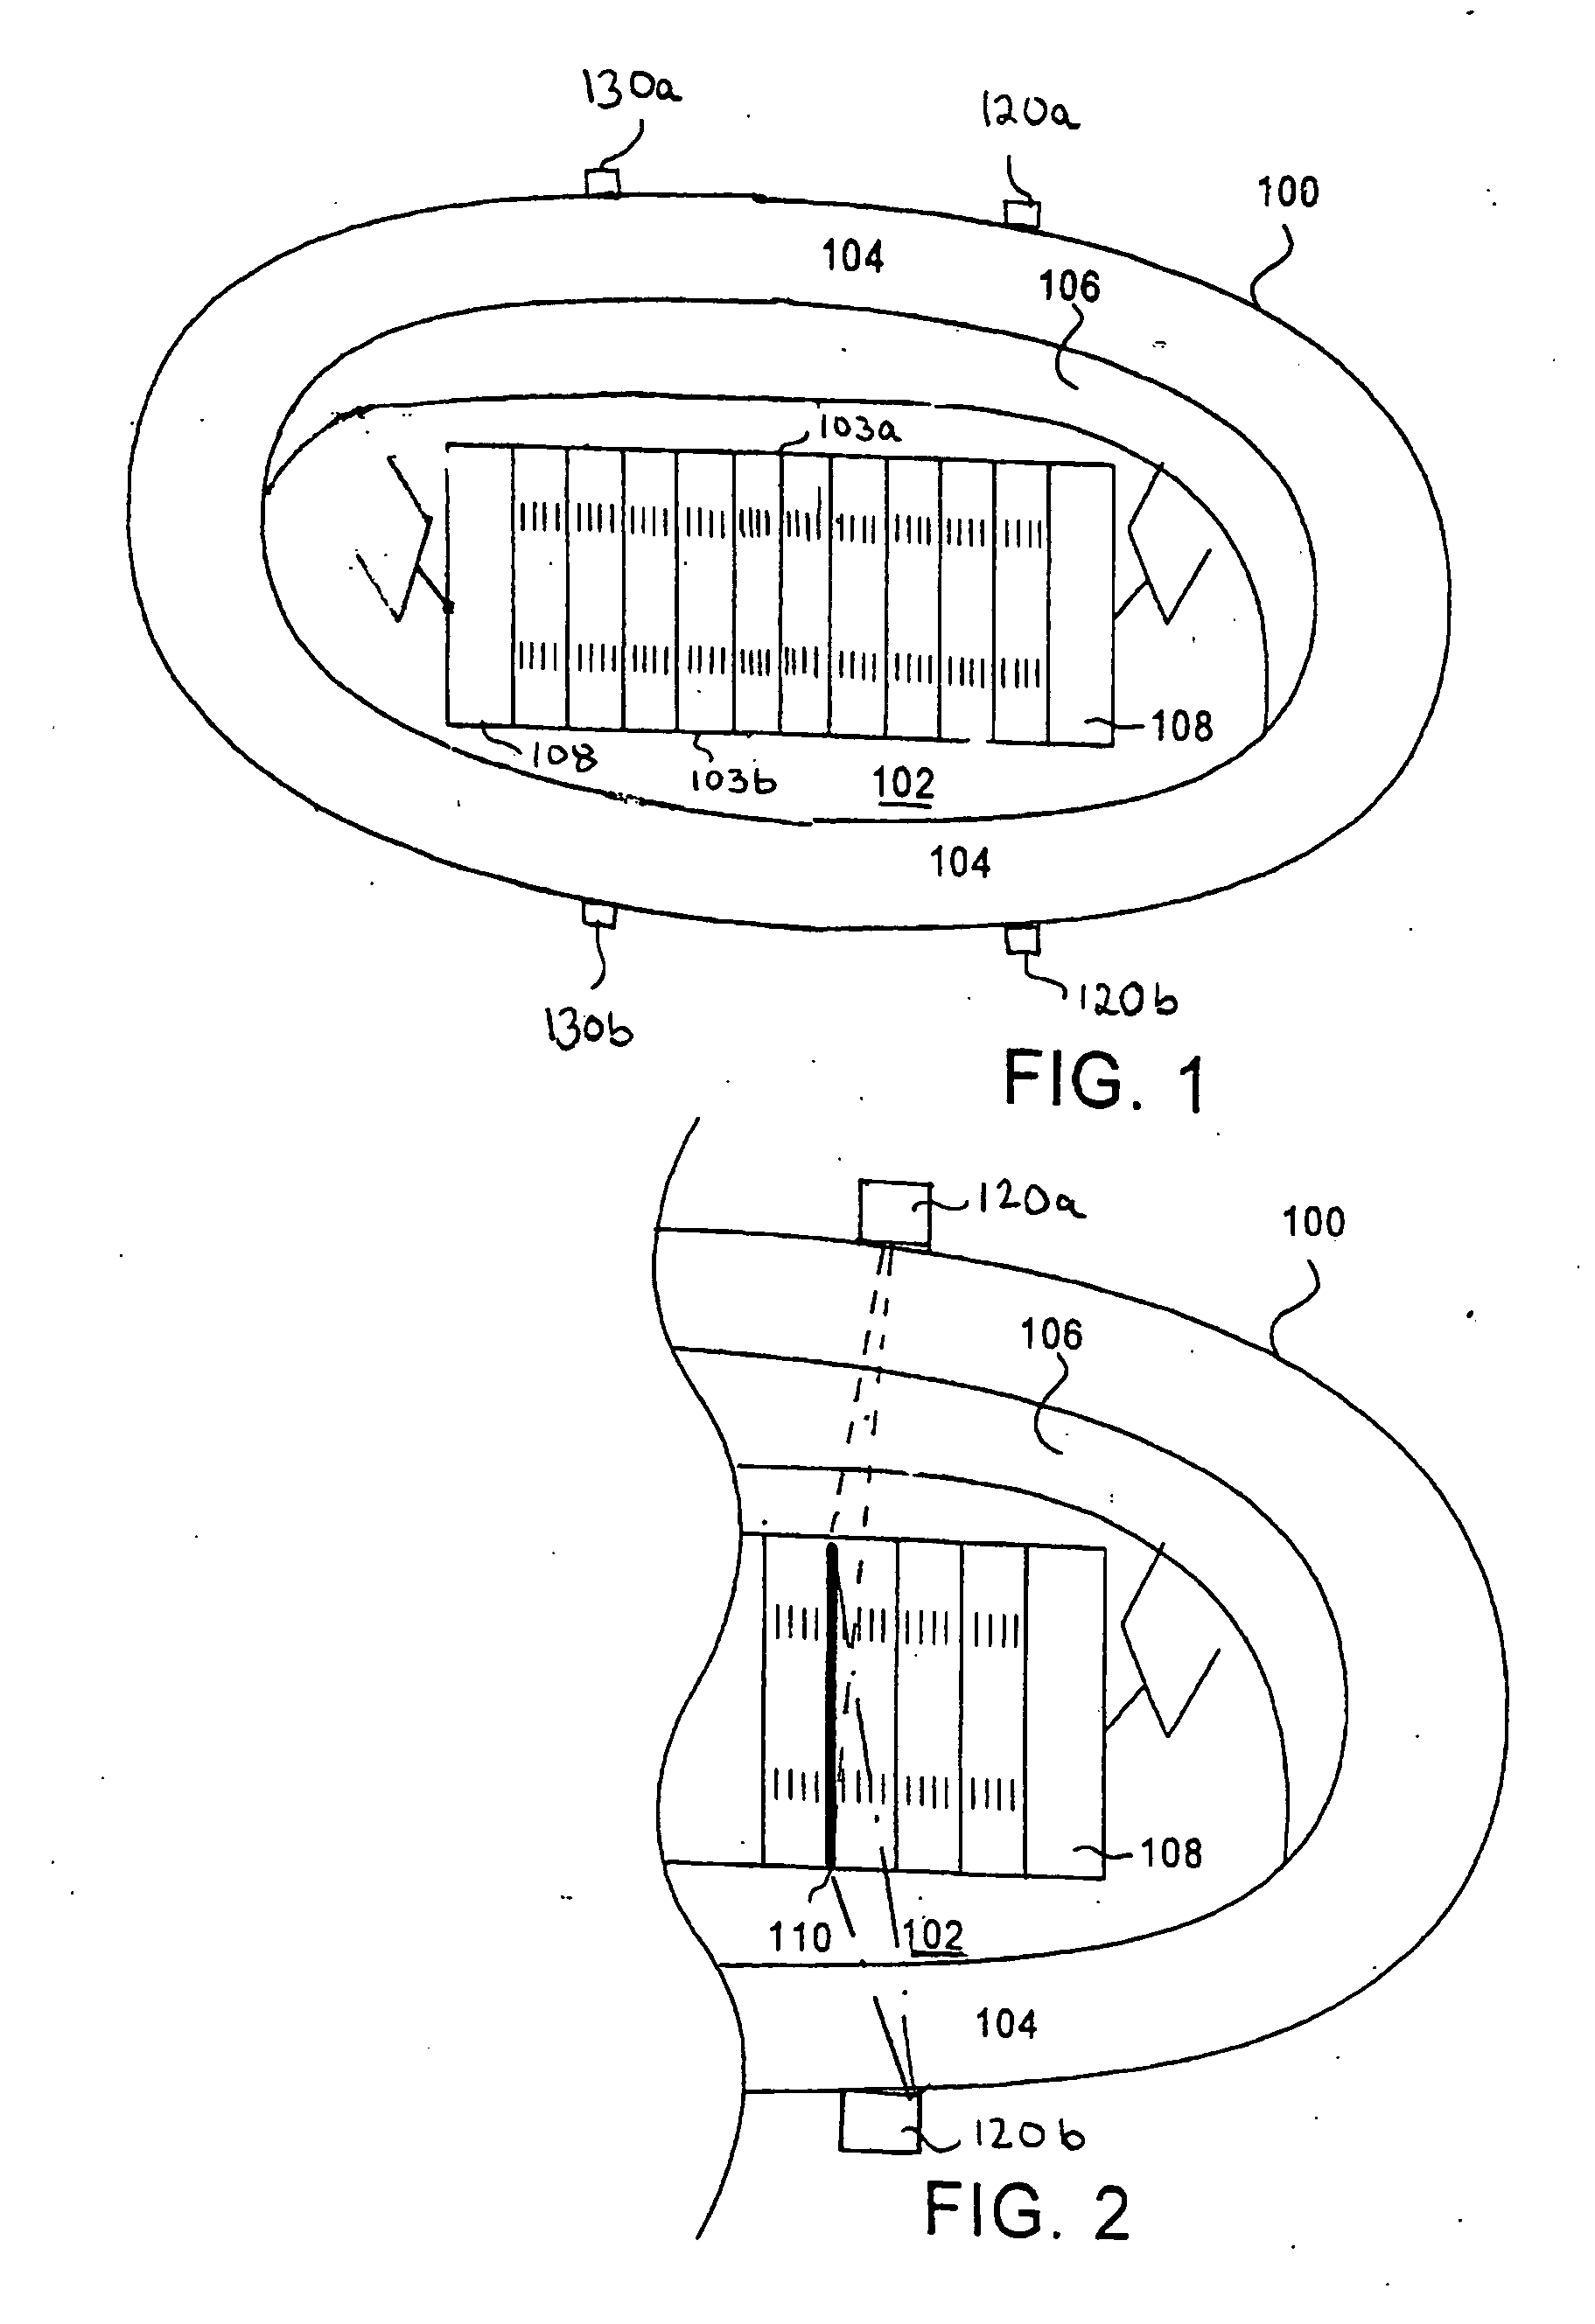 System for operating one or more suspended laser projectors to project a temporary visible image onto a surface